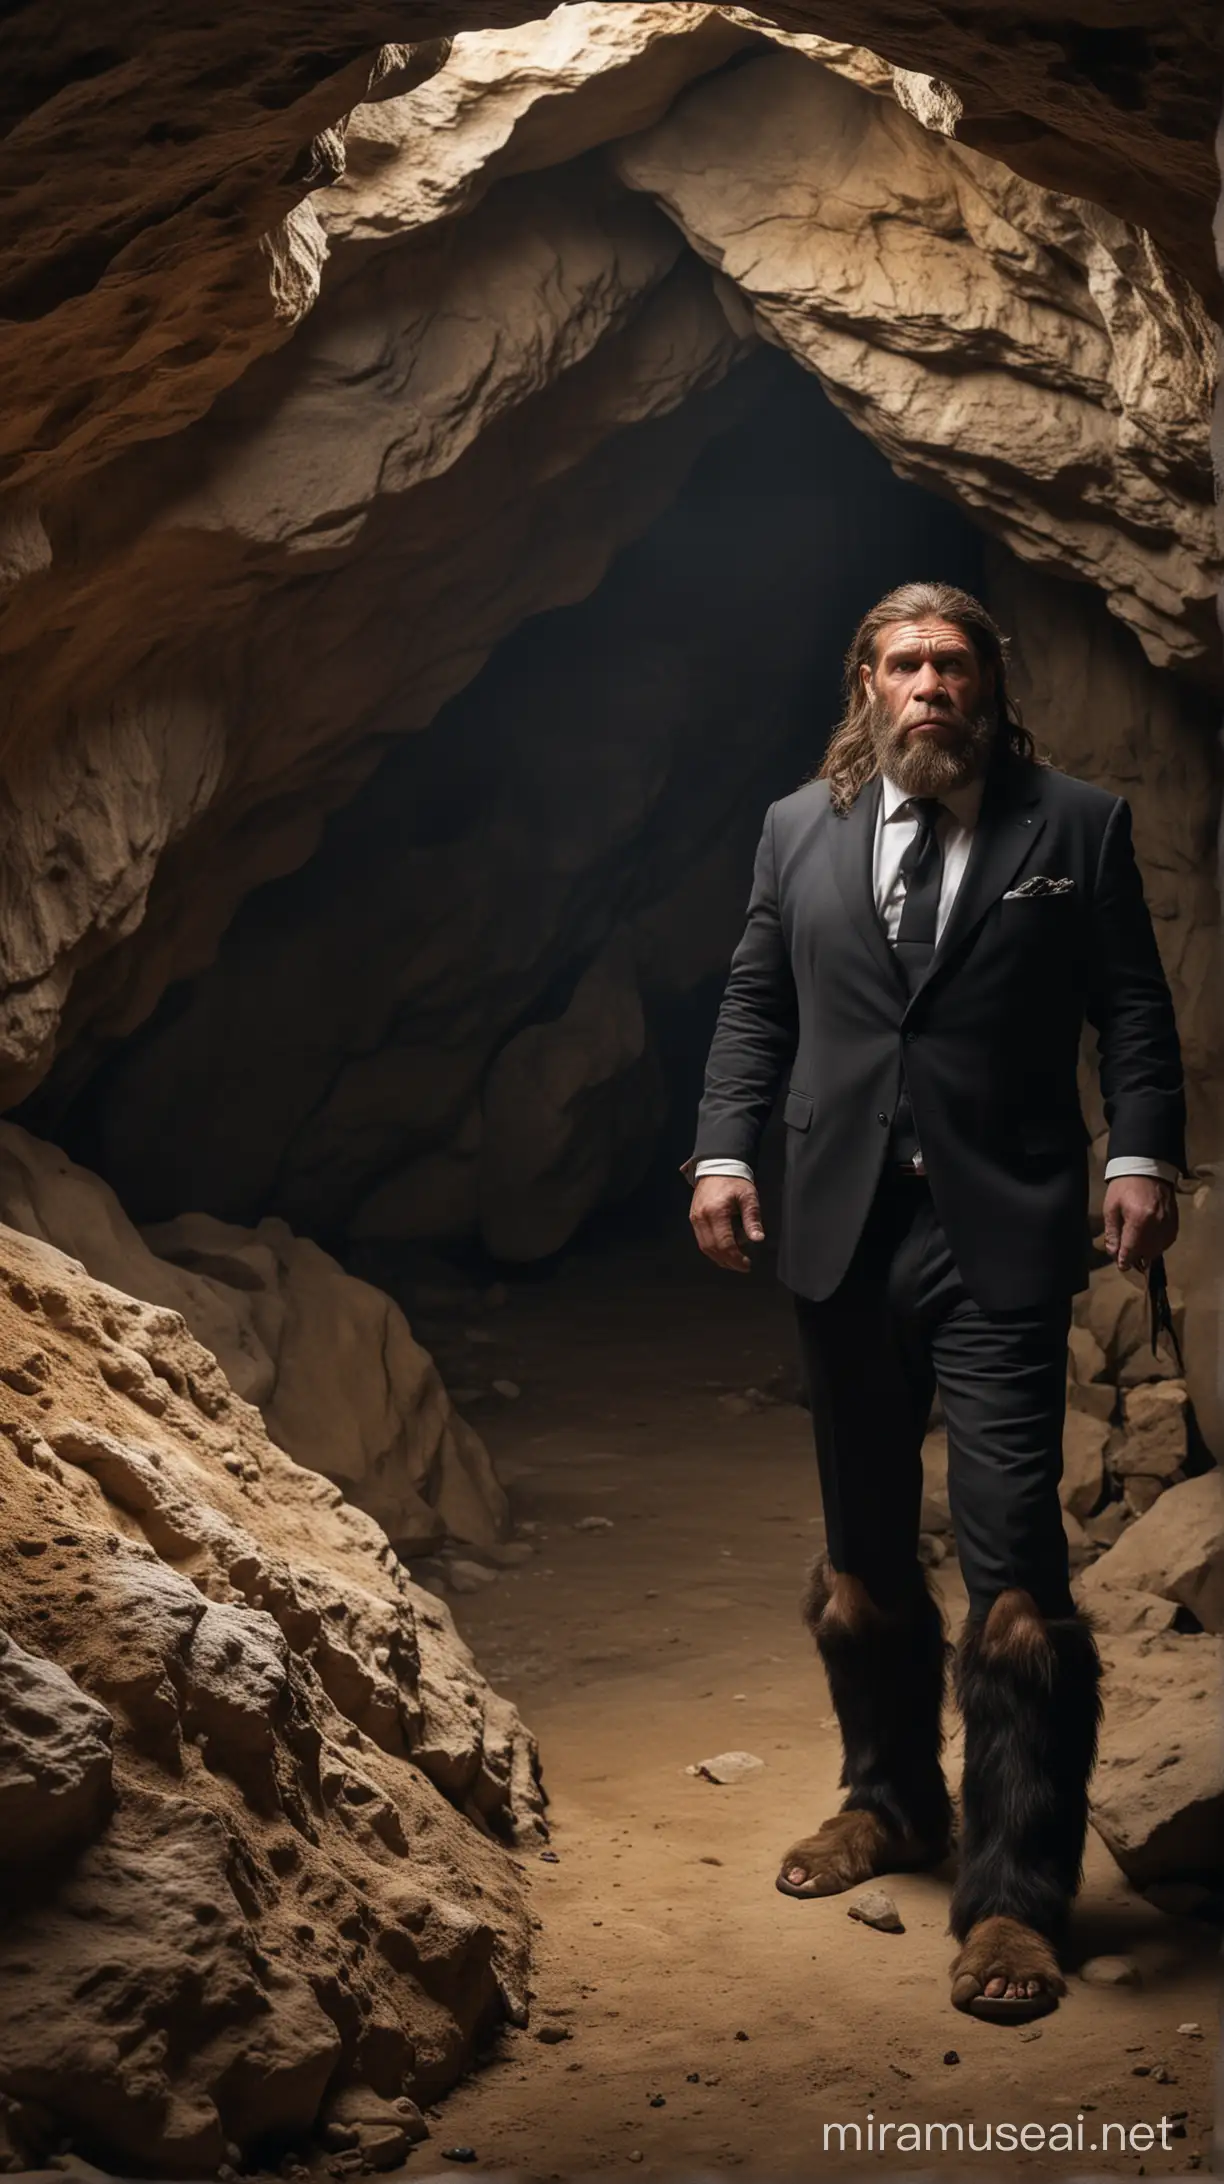 Neanderthal in Modern Suit Posing in a Cave Dwelling